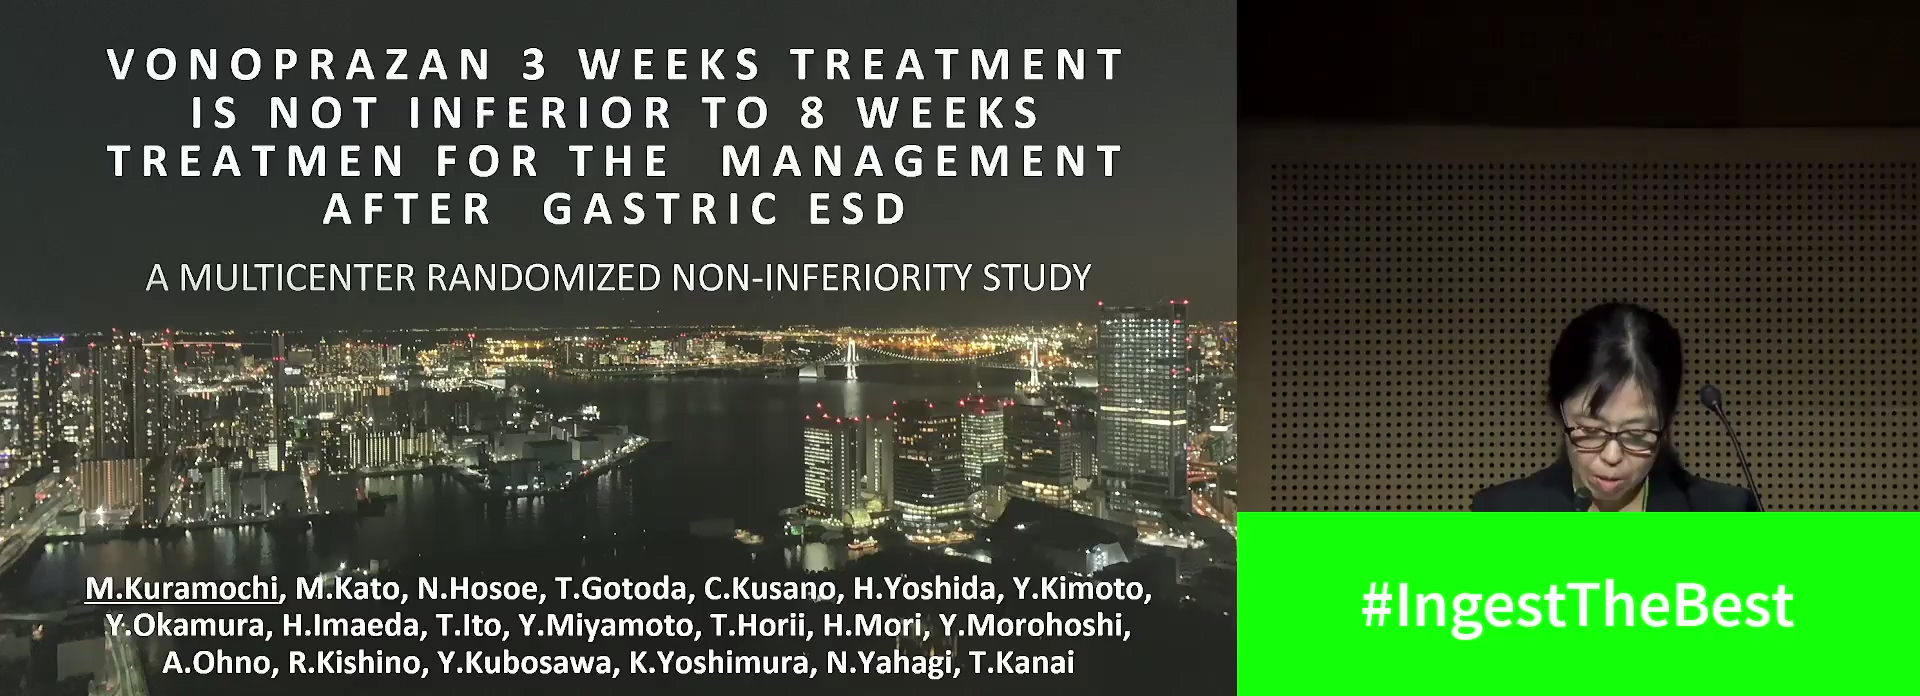 VONOPRAZAN 3 WEEKS TREATMENT IS NOT INFERIOR TO 8 WEEKS TREATMENT FOR THE MANAGEMENT AFTER GASTRIC ESD: A MULTICENTER RANDOMIZED NON-INFERIORITY STUDY